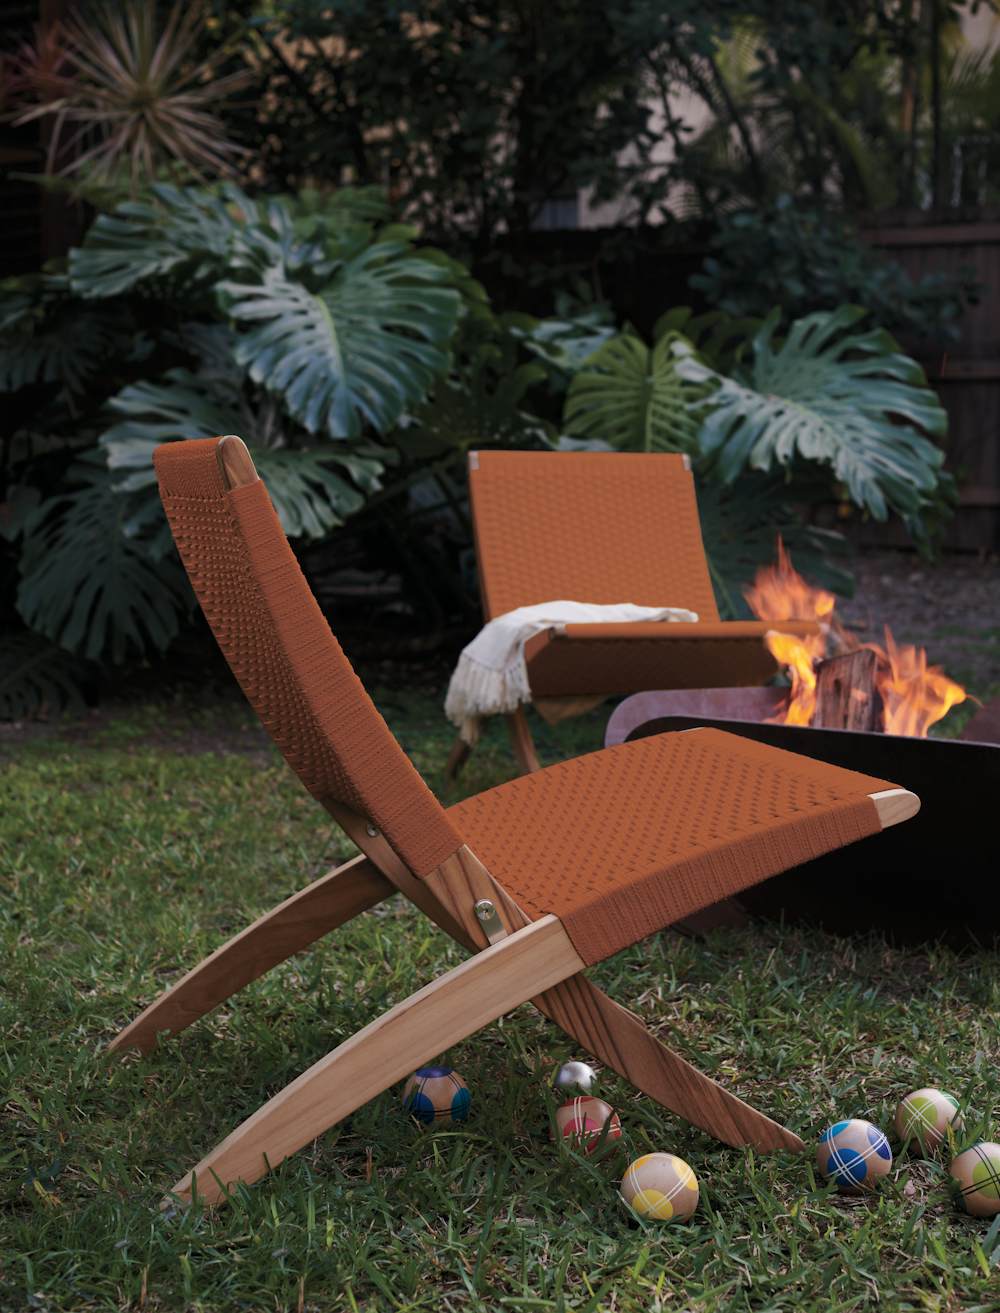 Cuba Outdoor Lounge Chair with Plodes Petal Fire pit in an outdoor setting